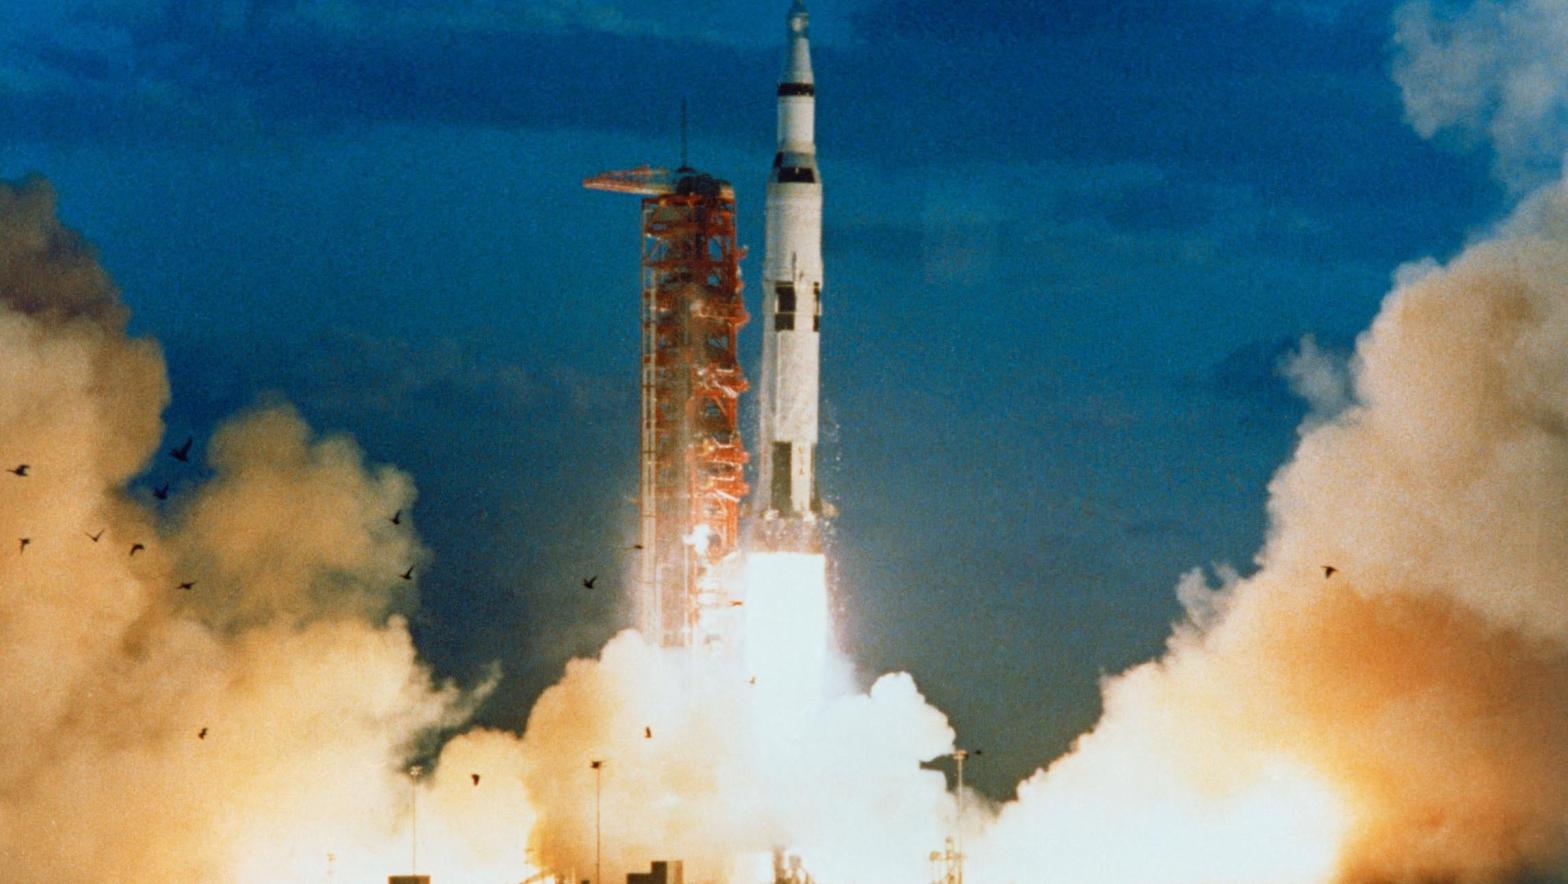 The Saturn V moon rocket launched in 1967 as part of the Apollo 4 mission. (Photo: NASA)